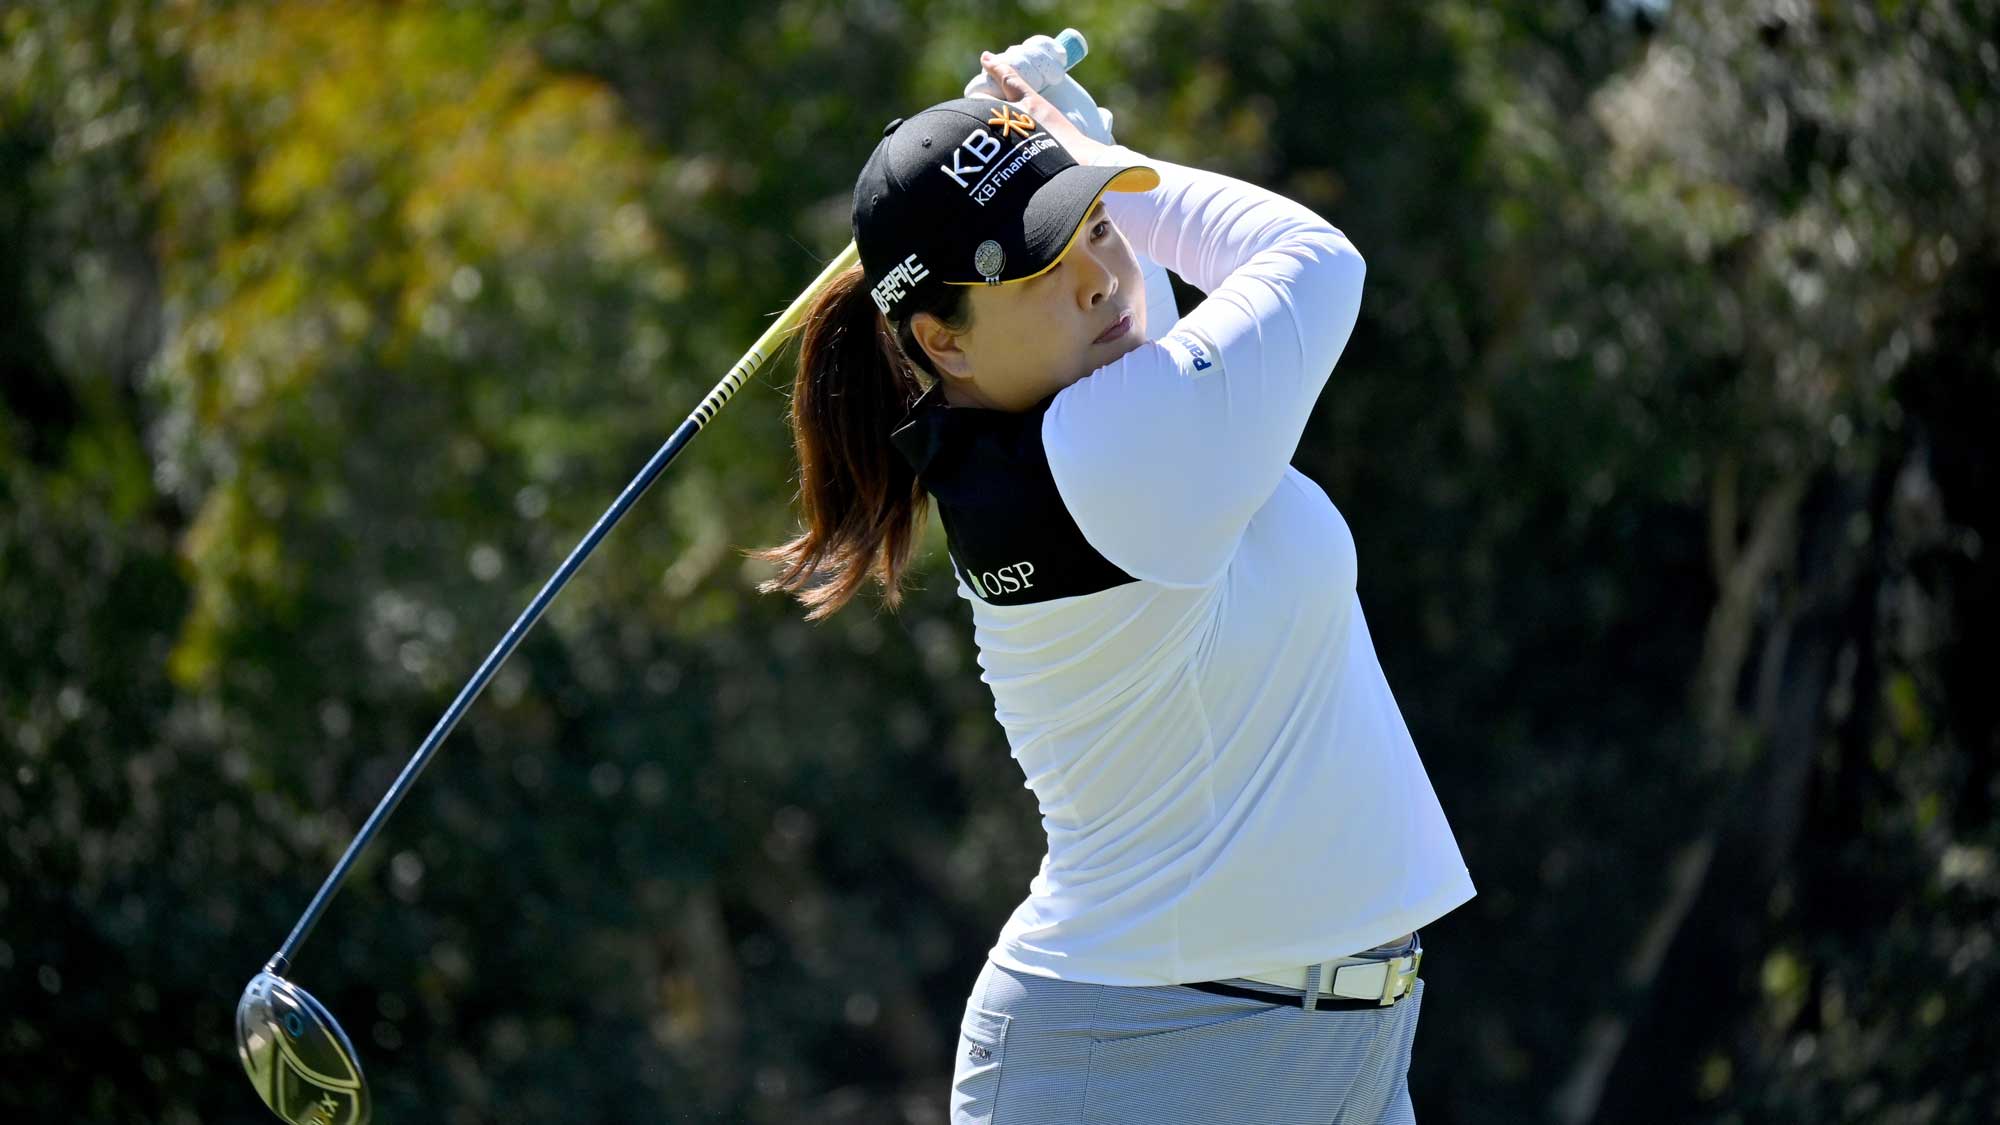 Inbee Park of South Korea tees off the 2nd hole during the Final Round of the KIA Classic at the Aviara Golf Club on March 28, 2021 in Carlsbad, California.